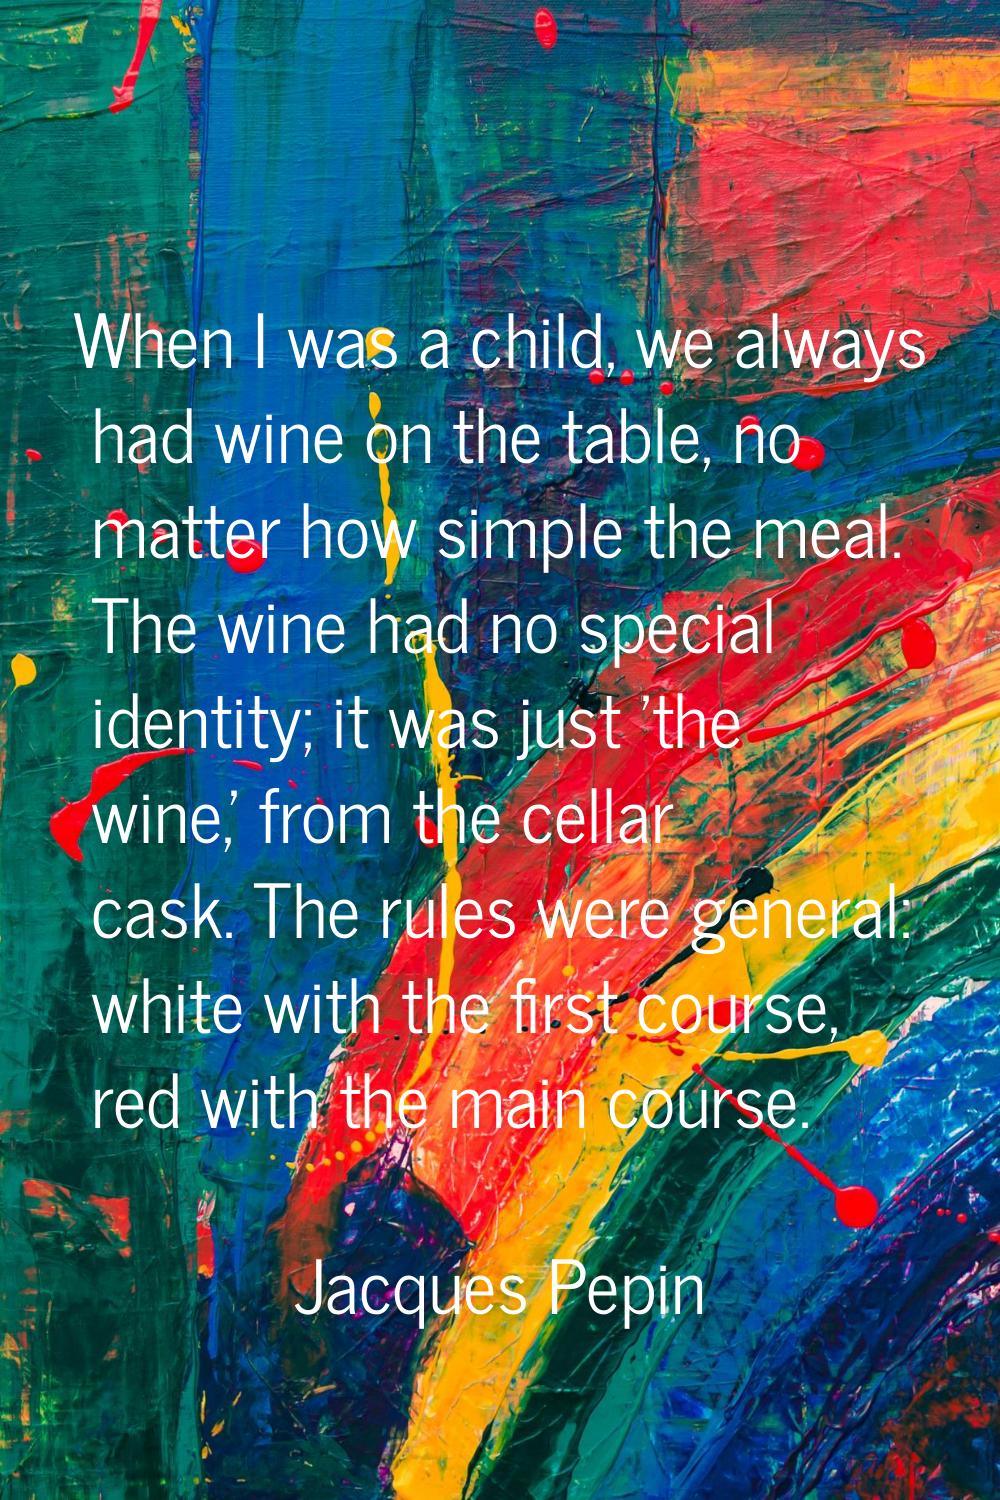 When I was a child, we always had wine on the table, no matter how simple the meal. The wine had no